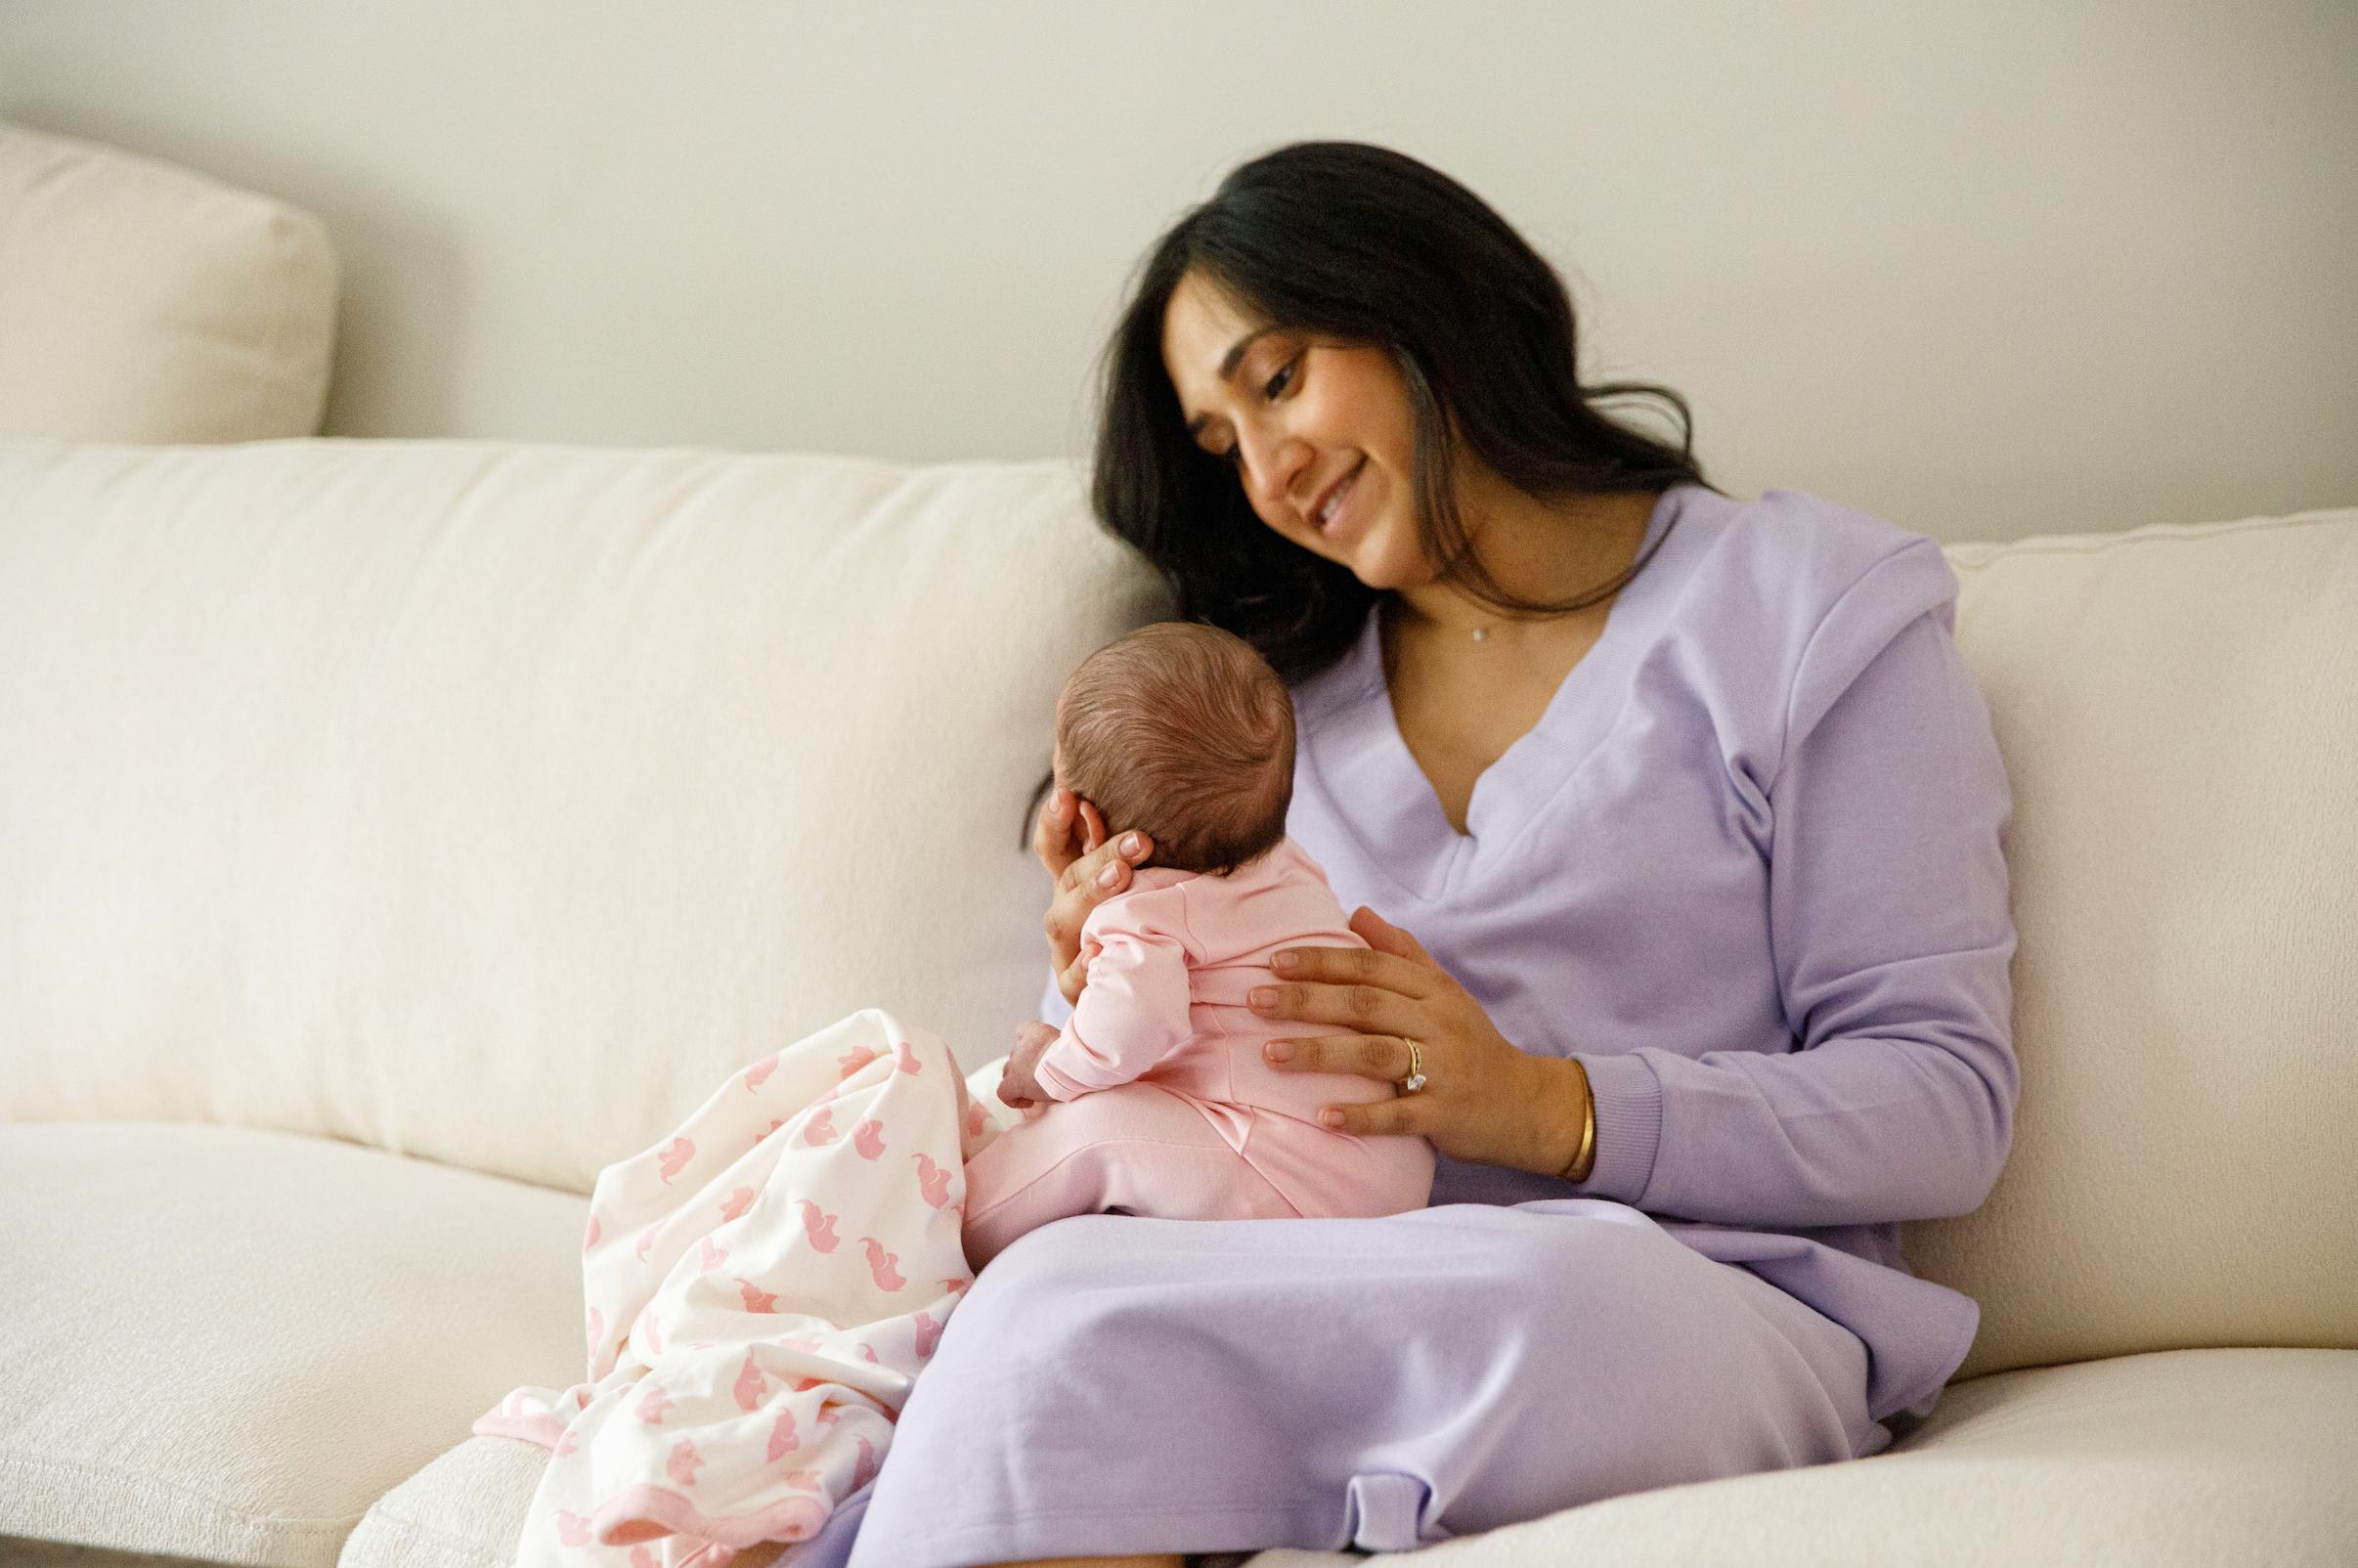 New mom in purple loungewear on couch with baby